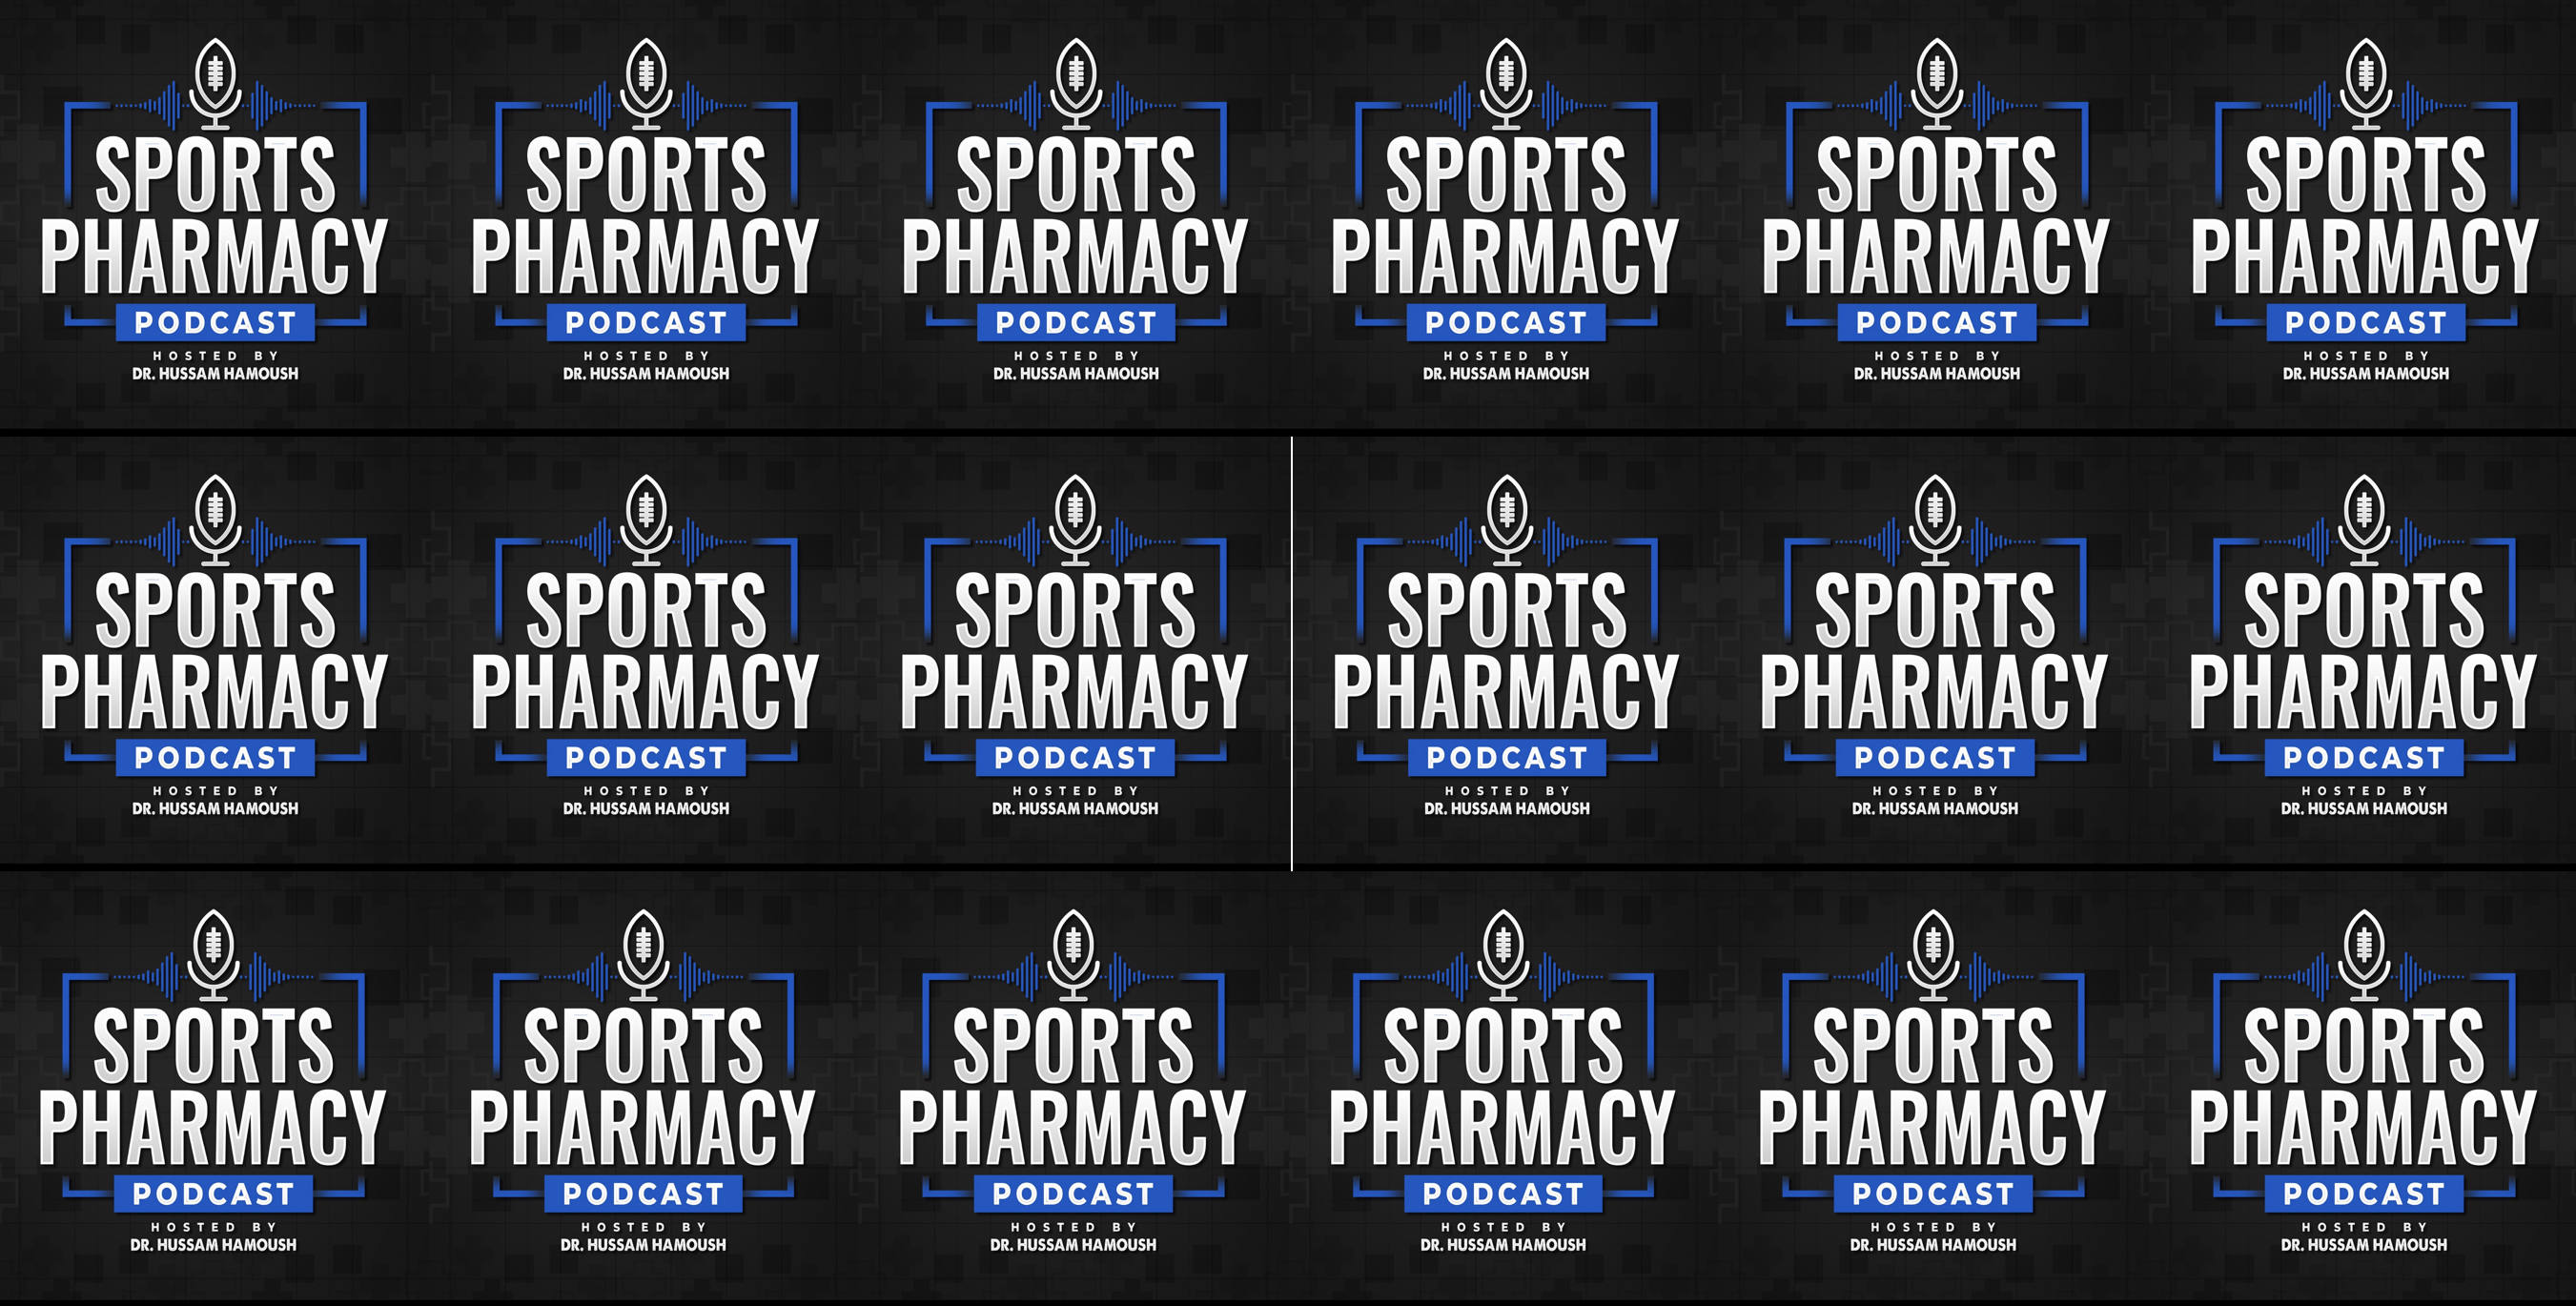 Sports Pharmacy Podcast Joins the Pharmacy Podcast Network